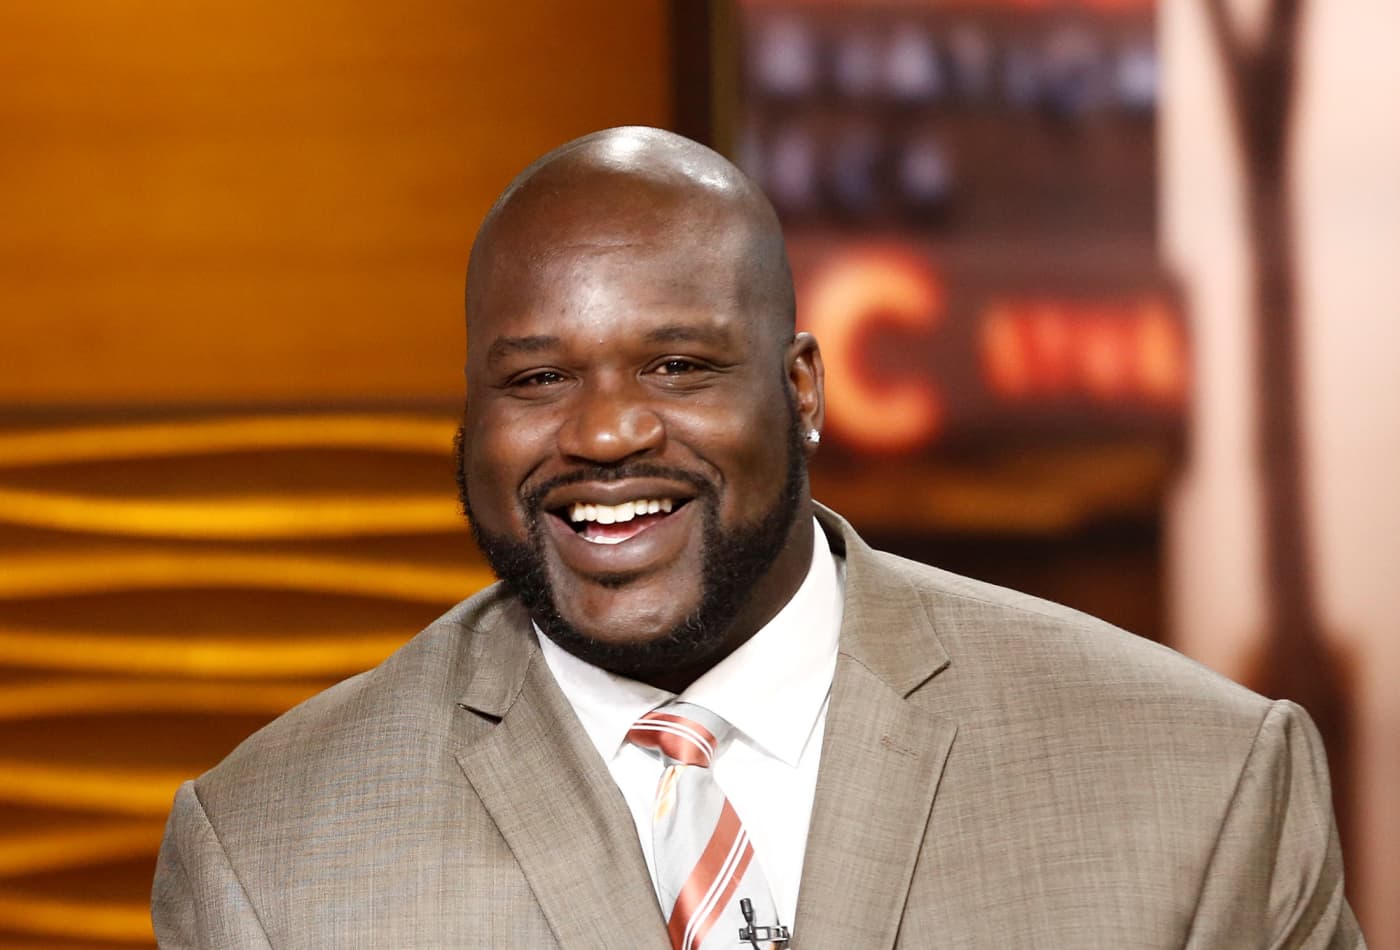 「Shaquille O'Neal」的圖片搜尋結果